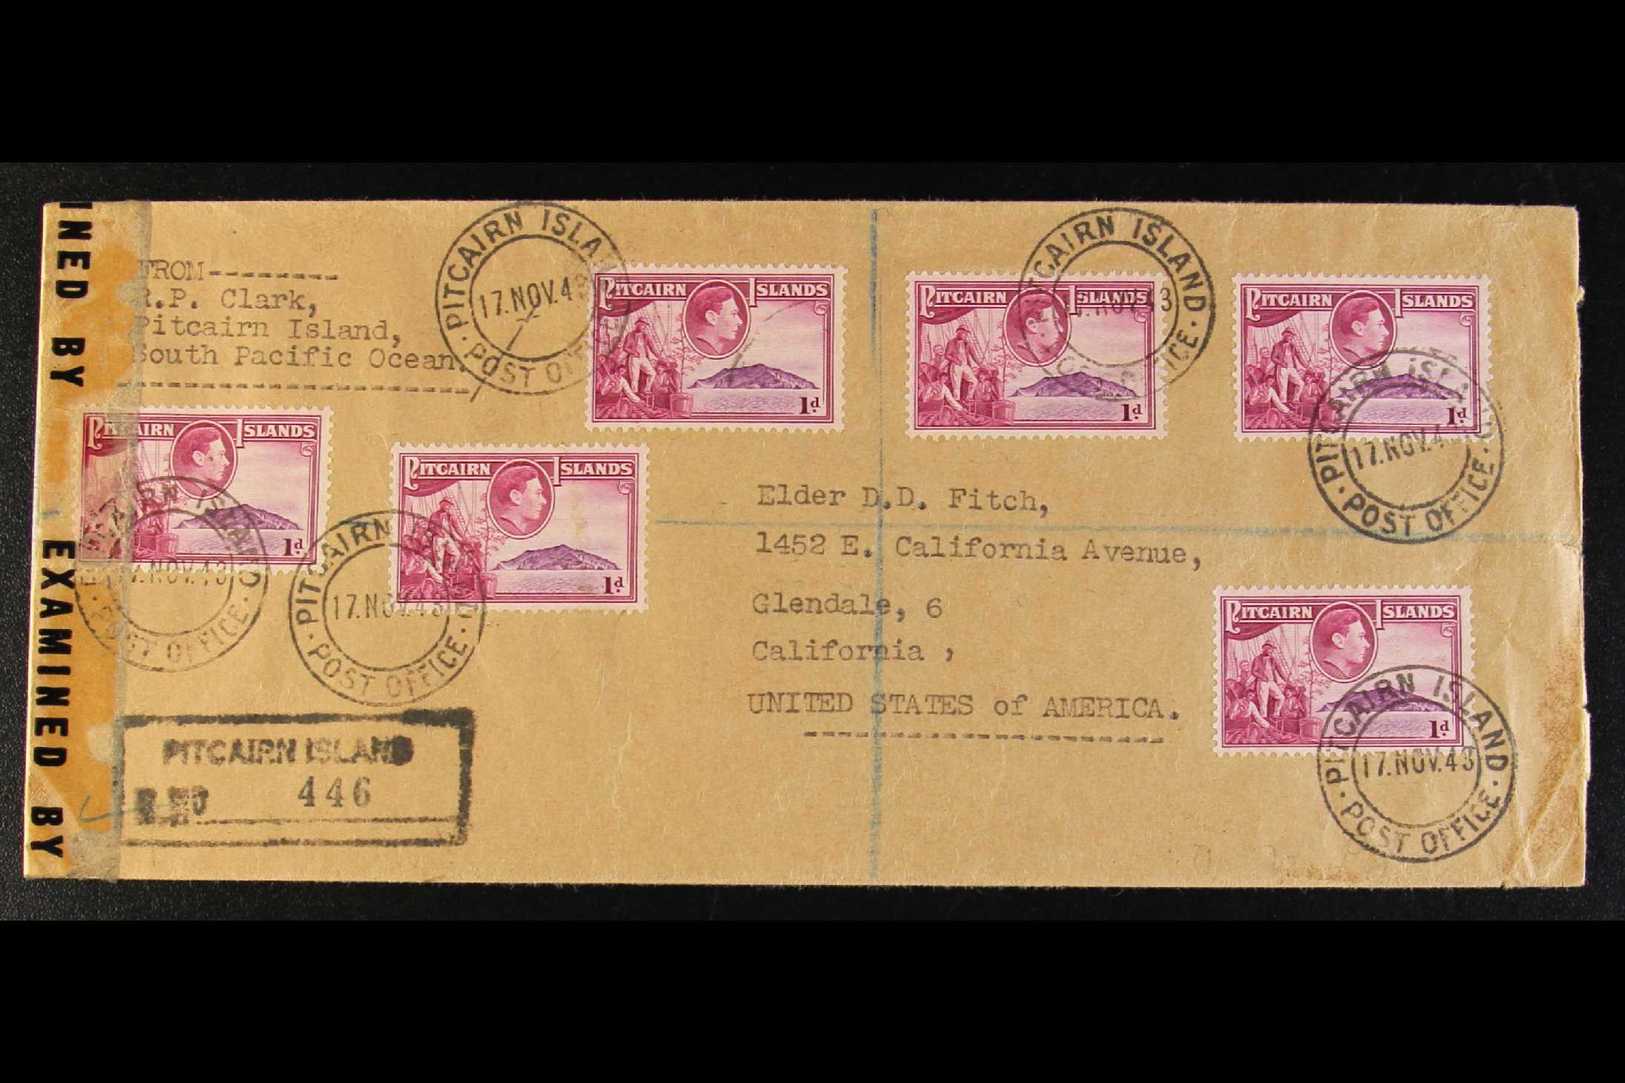 1943  (17 Nov) Registered Censored Cover To USA, Bearing 1d Stamps (x6) Tied By "Pitcairn Island" Cds's, Plus Two Transi - Pitcairn